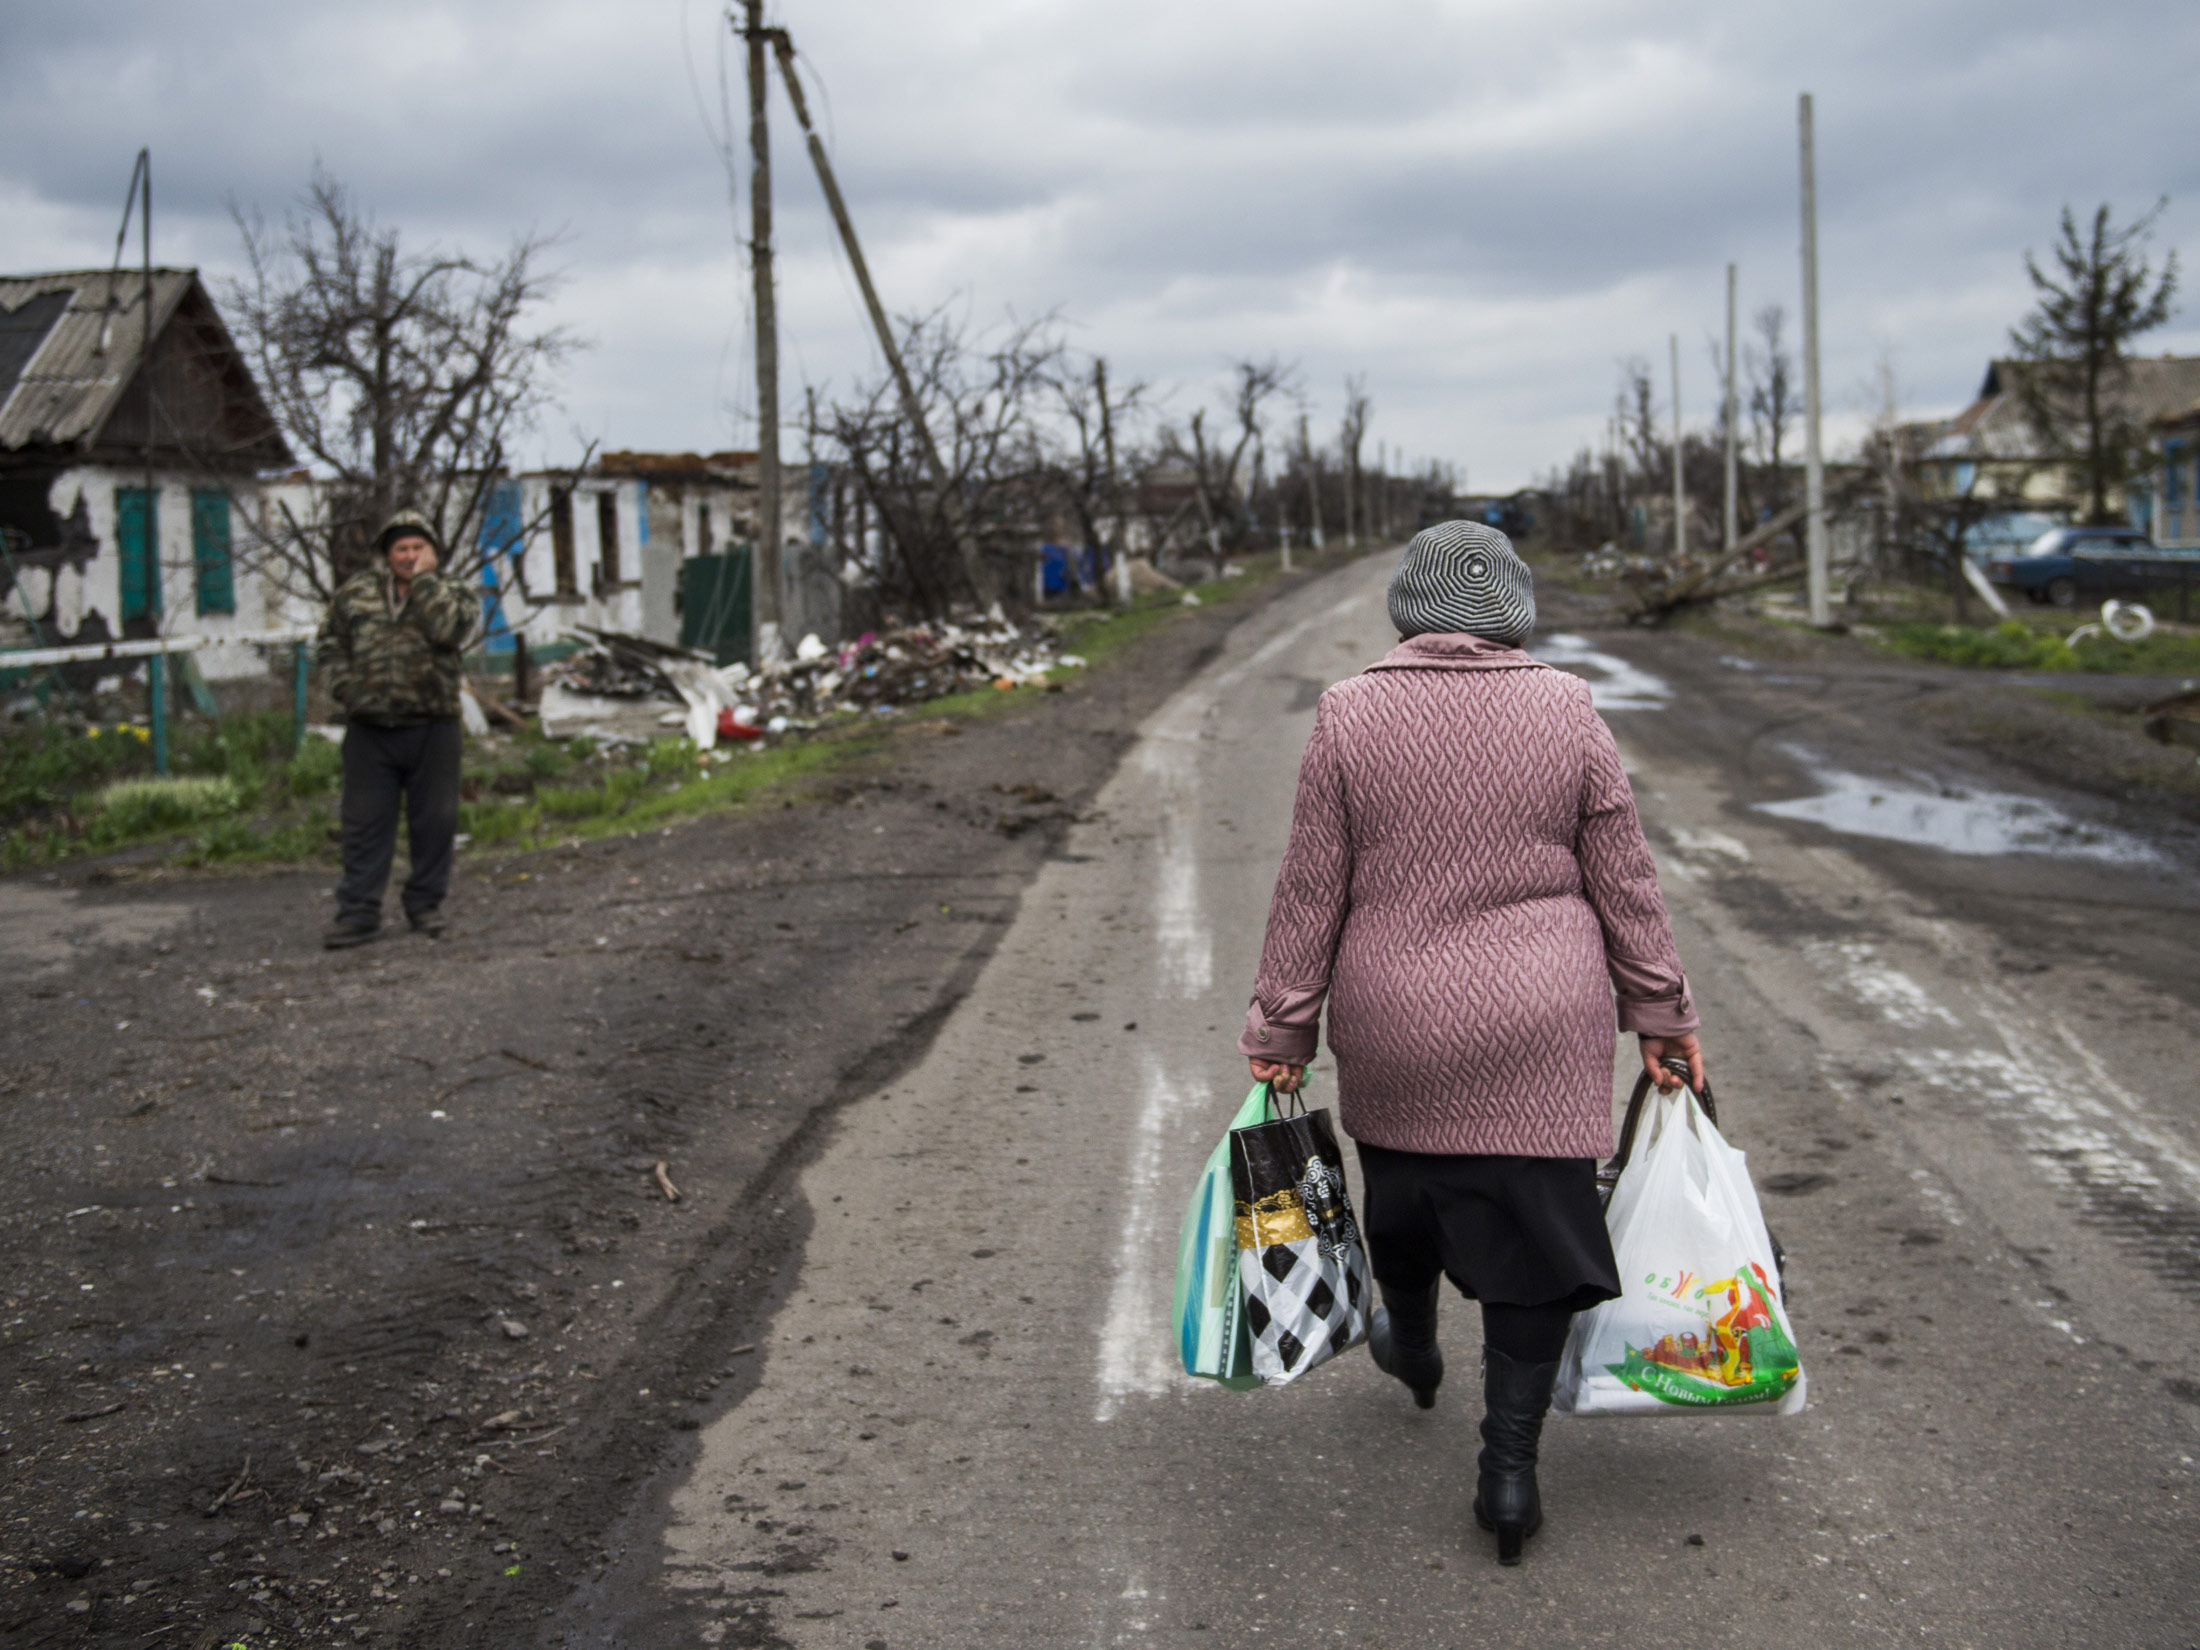 A woman carries walks back to the village of Nikishino in Ukraine, on April 21, 2015.
